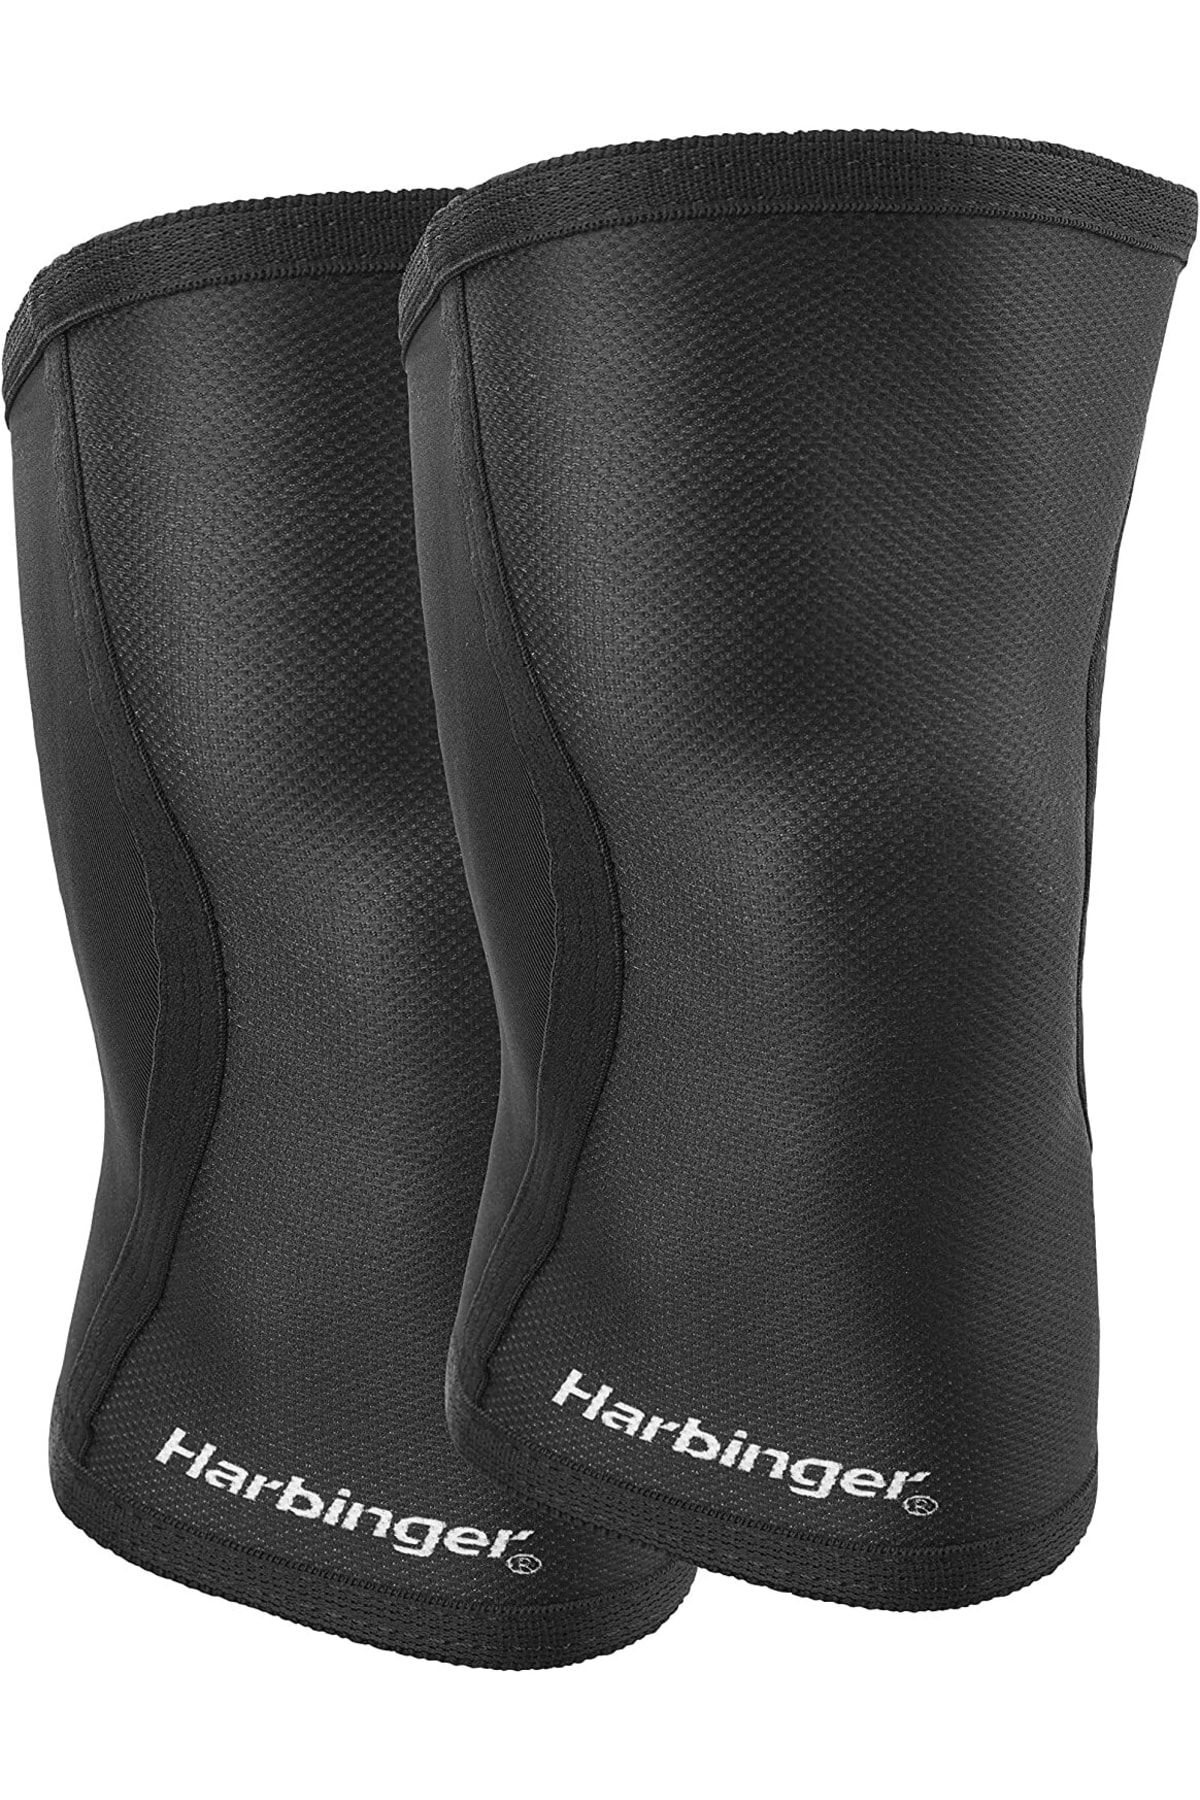 Harbinger 5mm Knee Sleeves For Weight Lifting, Unisex